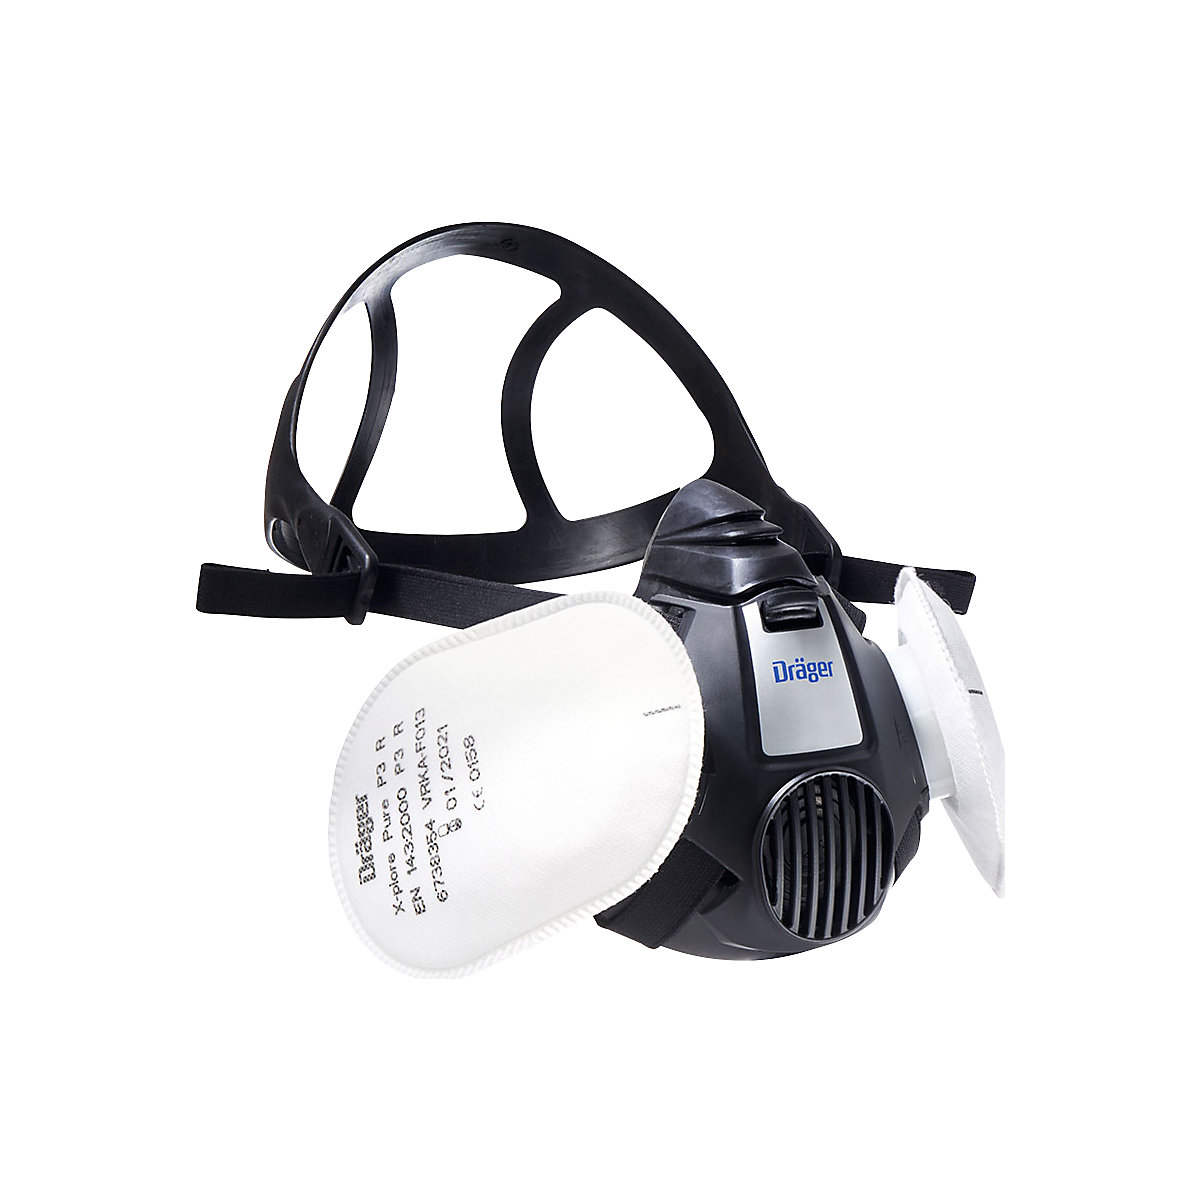 Set of X-plore® 3300 half masks incl. 2 filters for painting work - Dräger